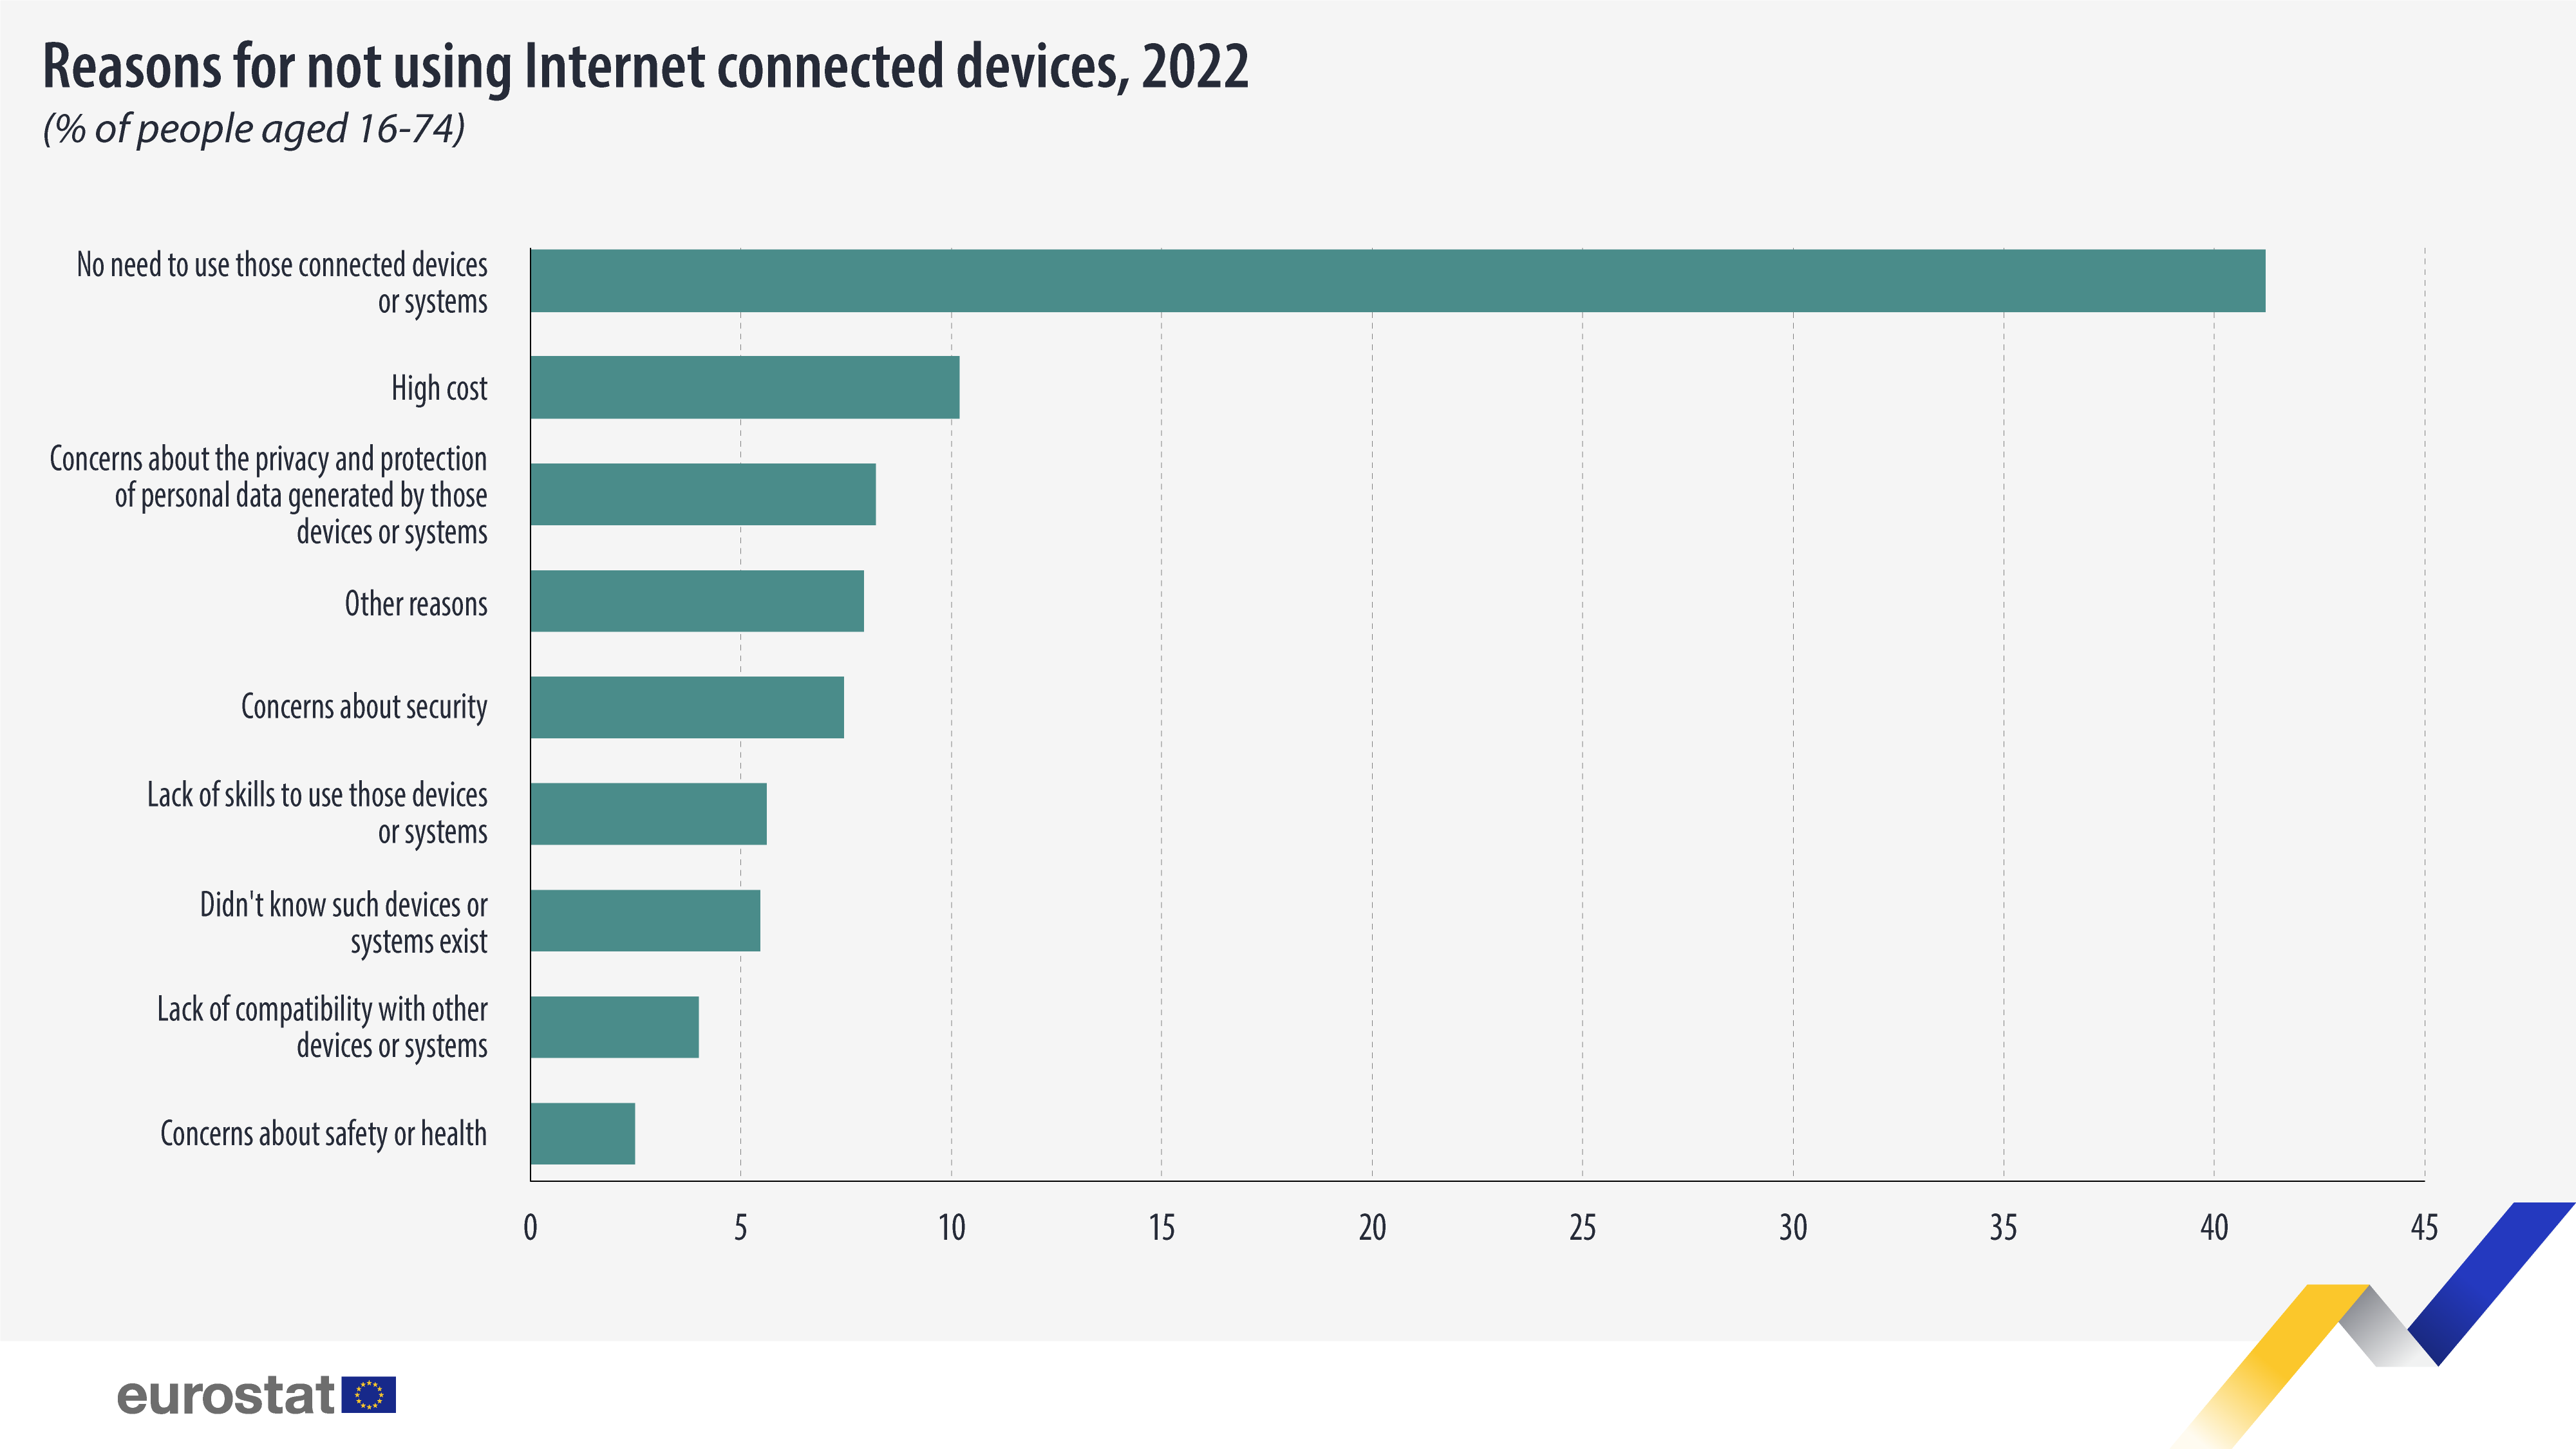 Bar chart: Reasons for not using Internet-connected devices, % of people aged 16-74, 2022